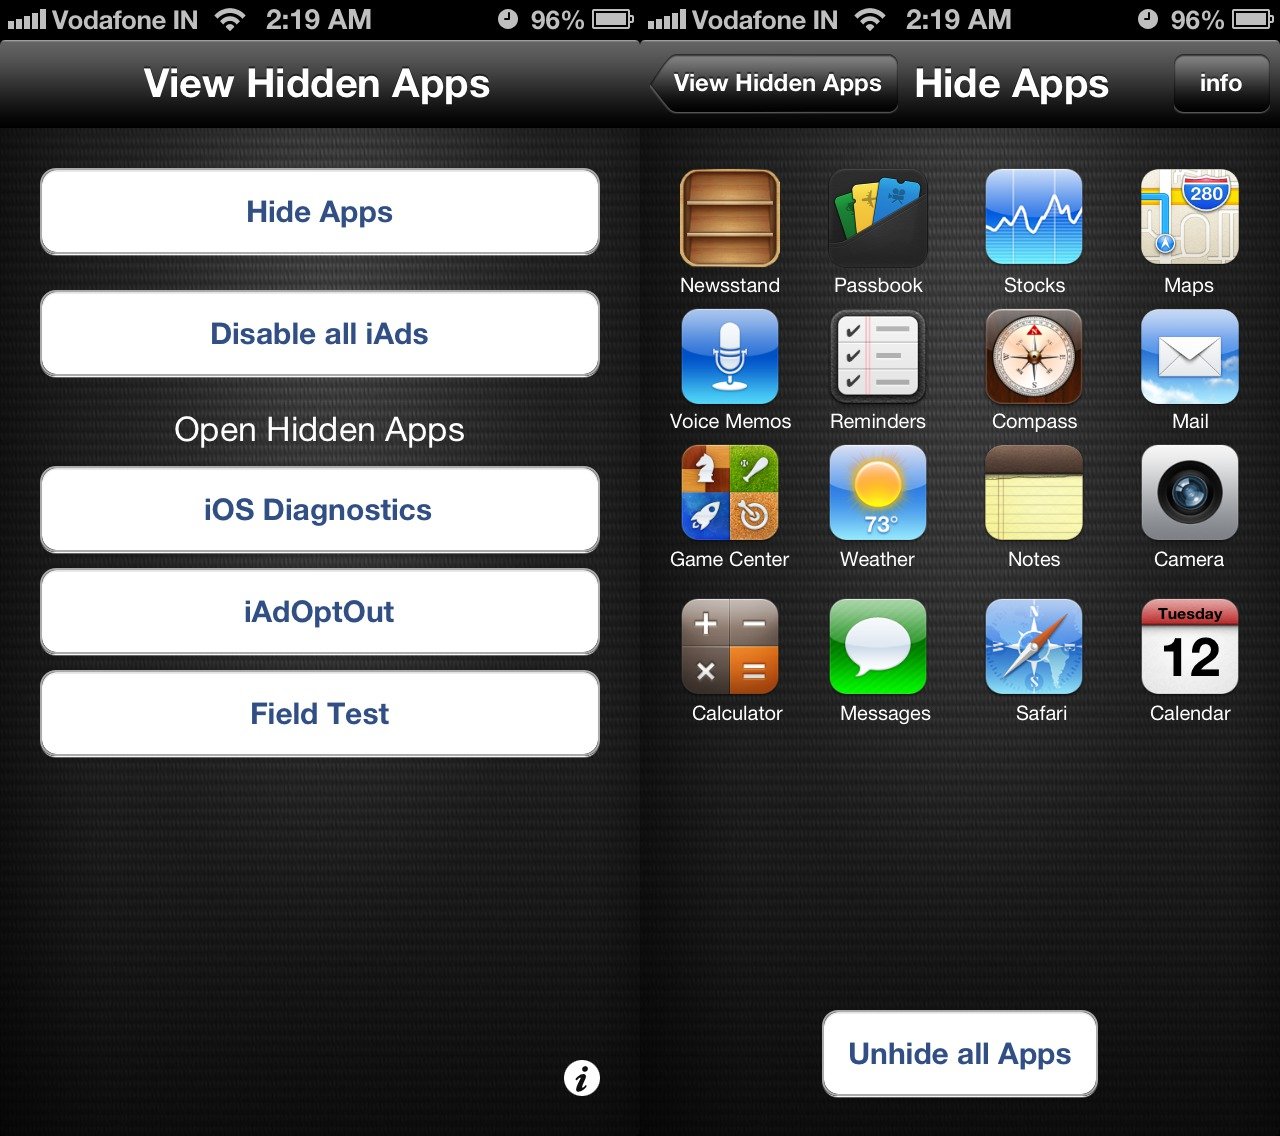 App Store App Lets you Hide Stock iOS Apps and Disable iAds